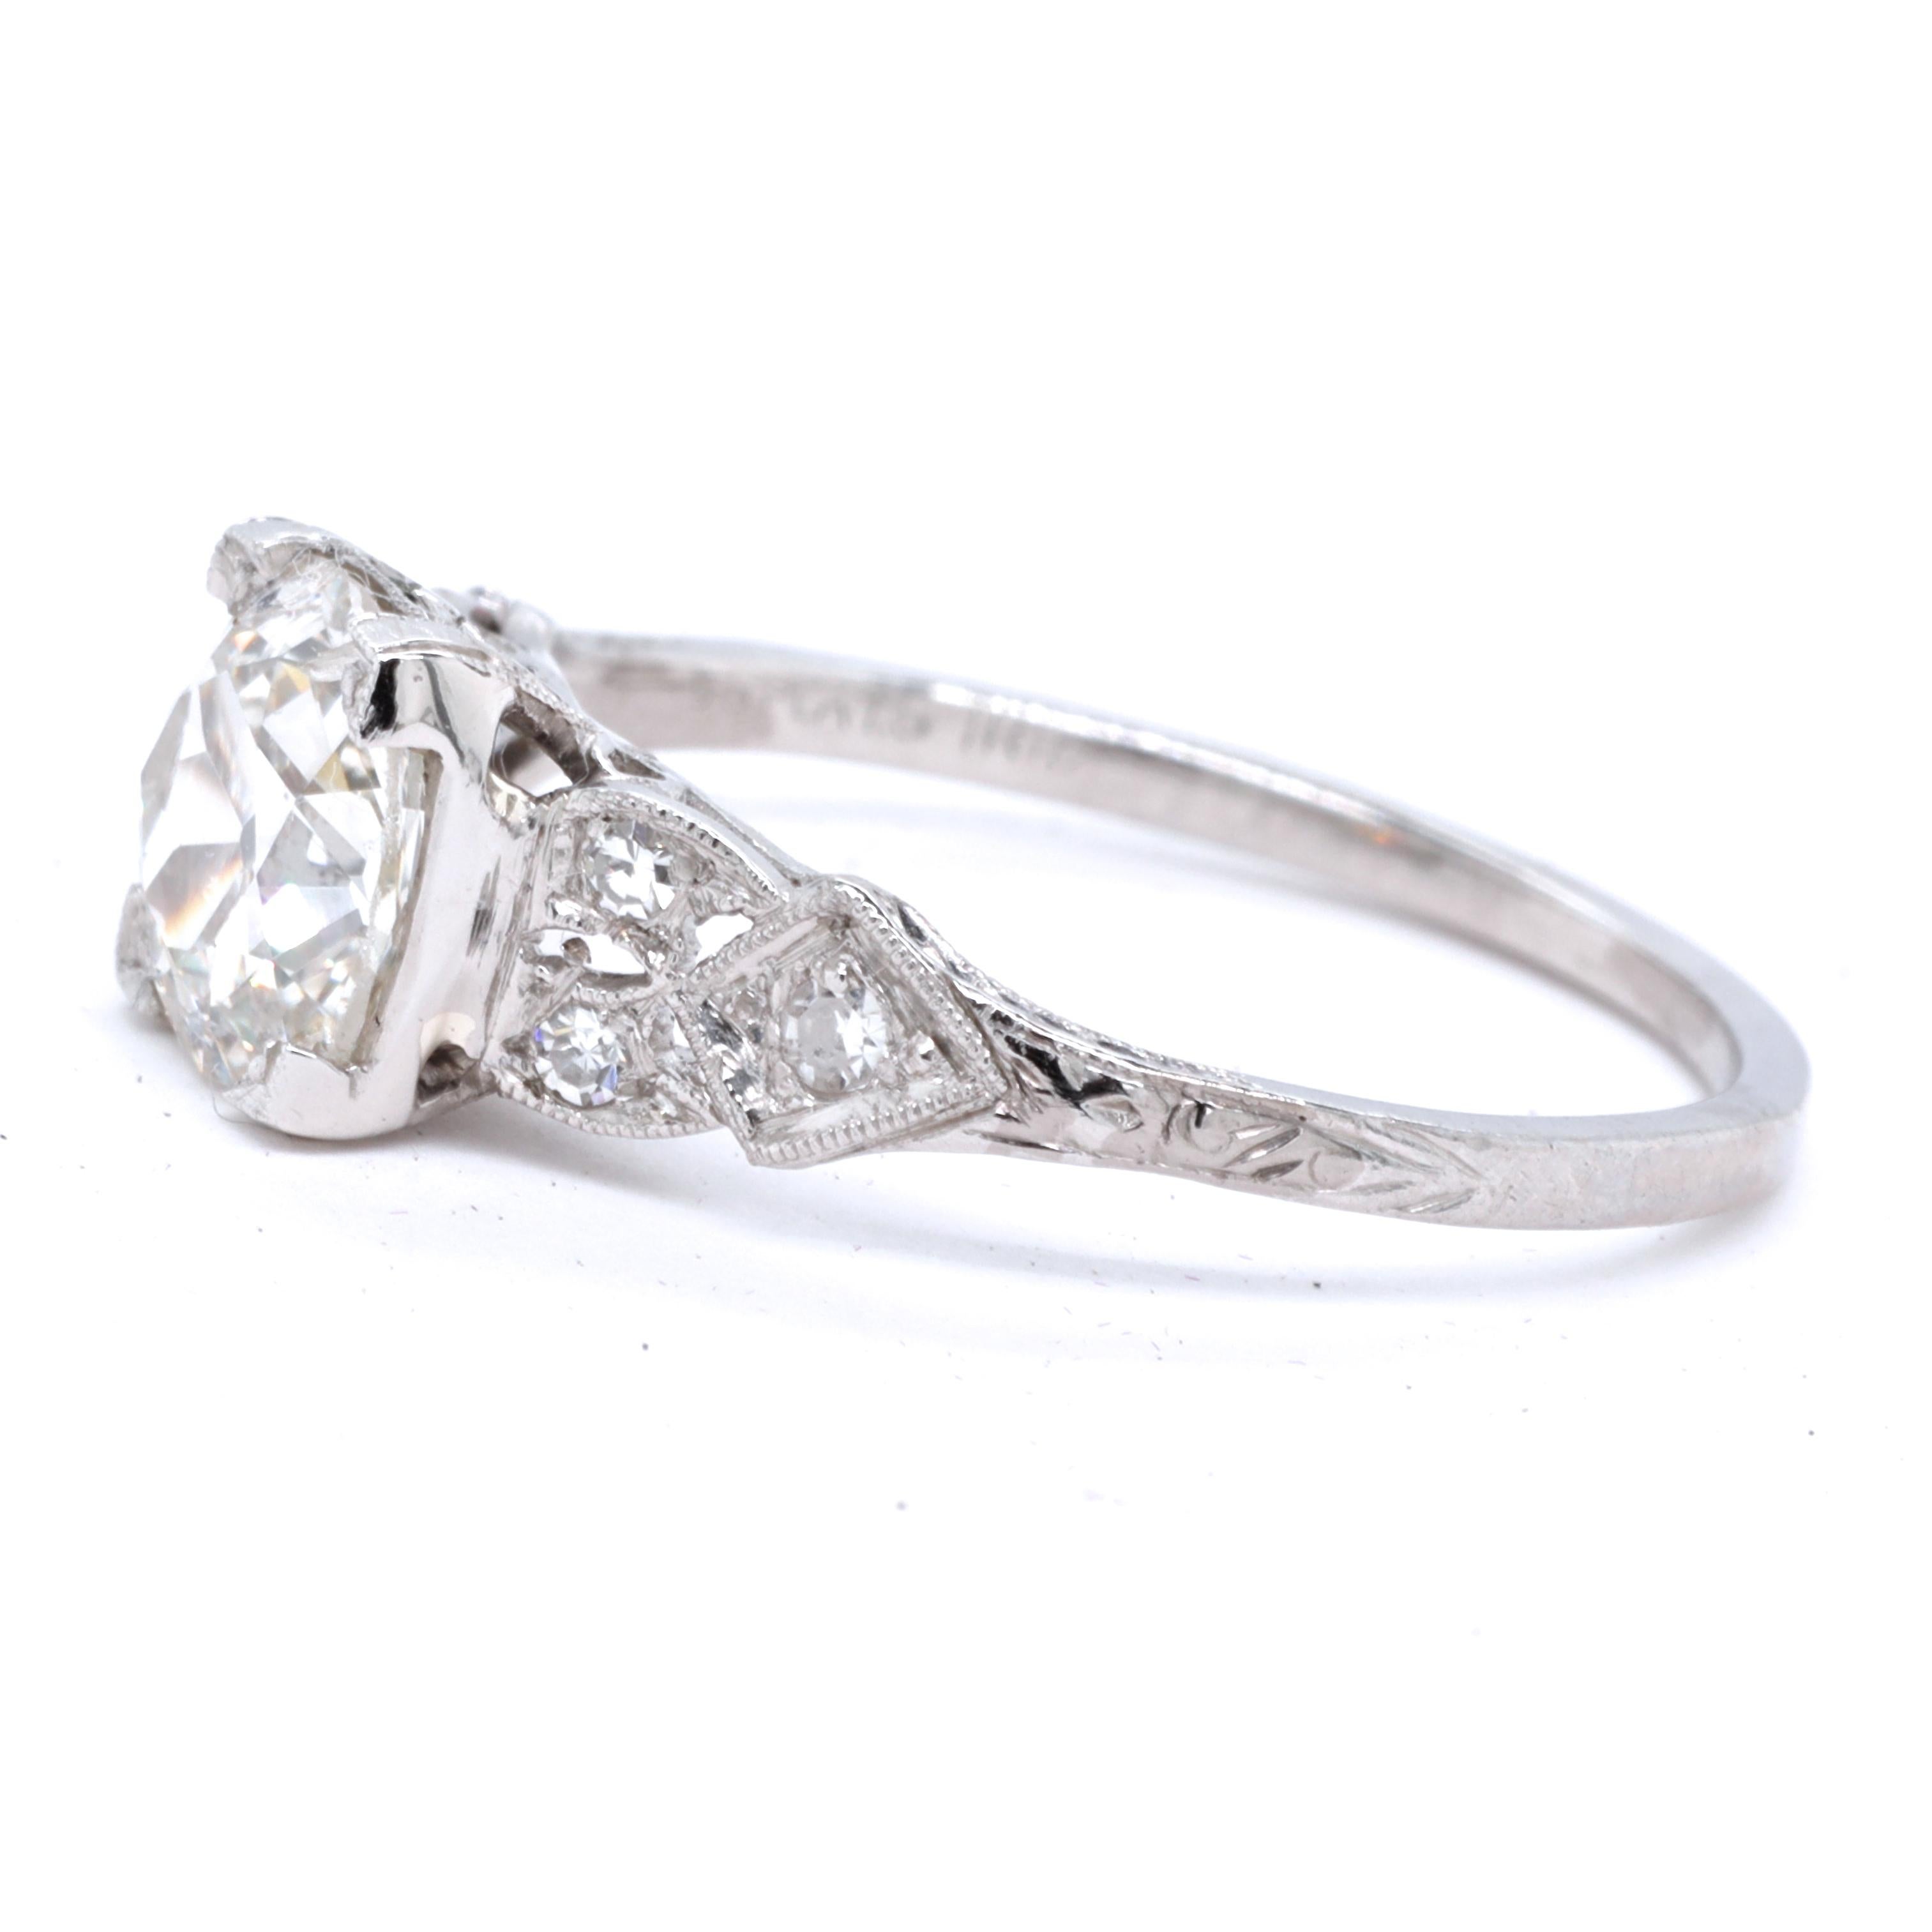 This could be your engagement ring. It has history, charm, elegance and longevity which bodes well for the future. The ring presents symmetry and delicacy, in the best Art Deco traditions. The center stone is GIA certified Old Mine Cut, 1.20 carat,